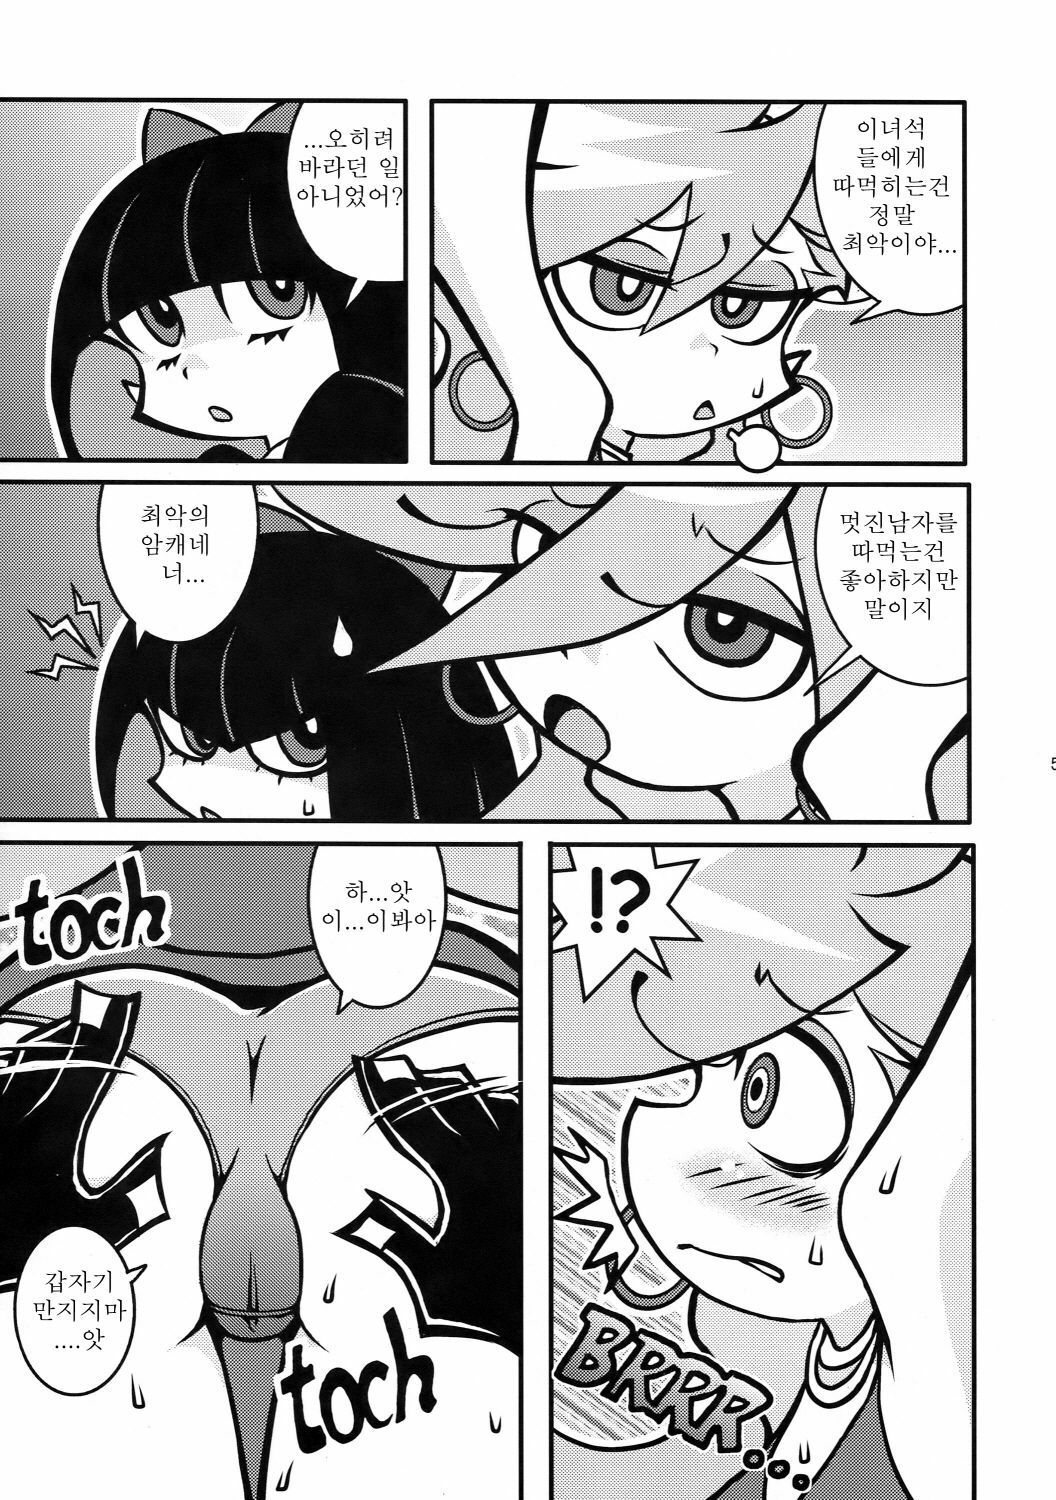 (C79) [1787 (Macaroni and Cheese)] R18 (Panty & Stocking with Garterbelt) [Korean] [백두산] page 5 full